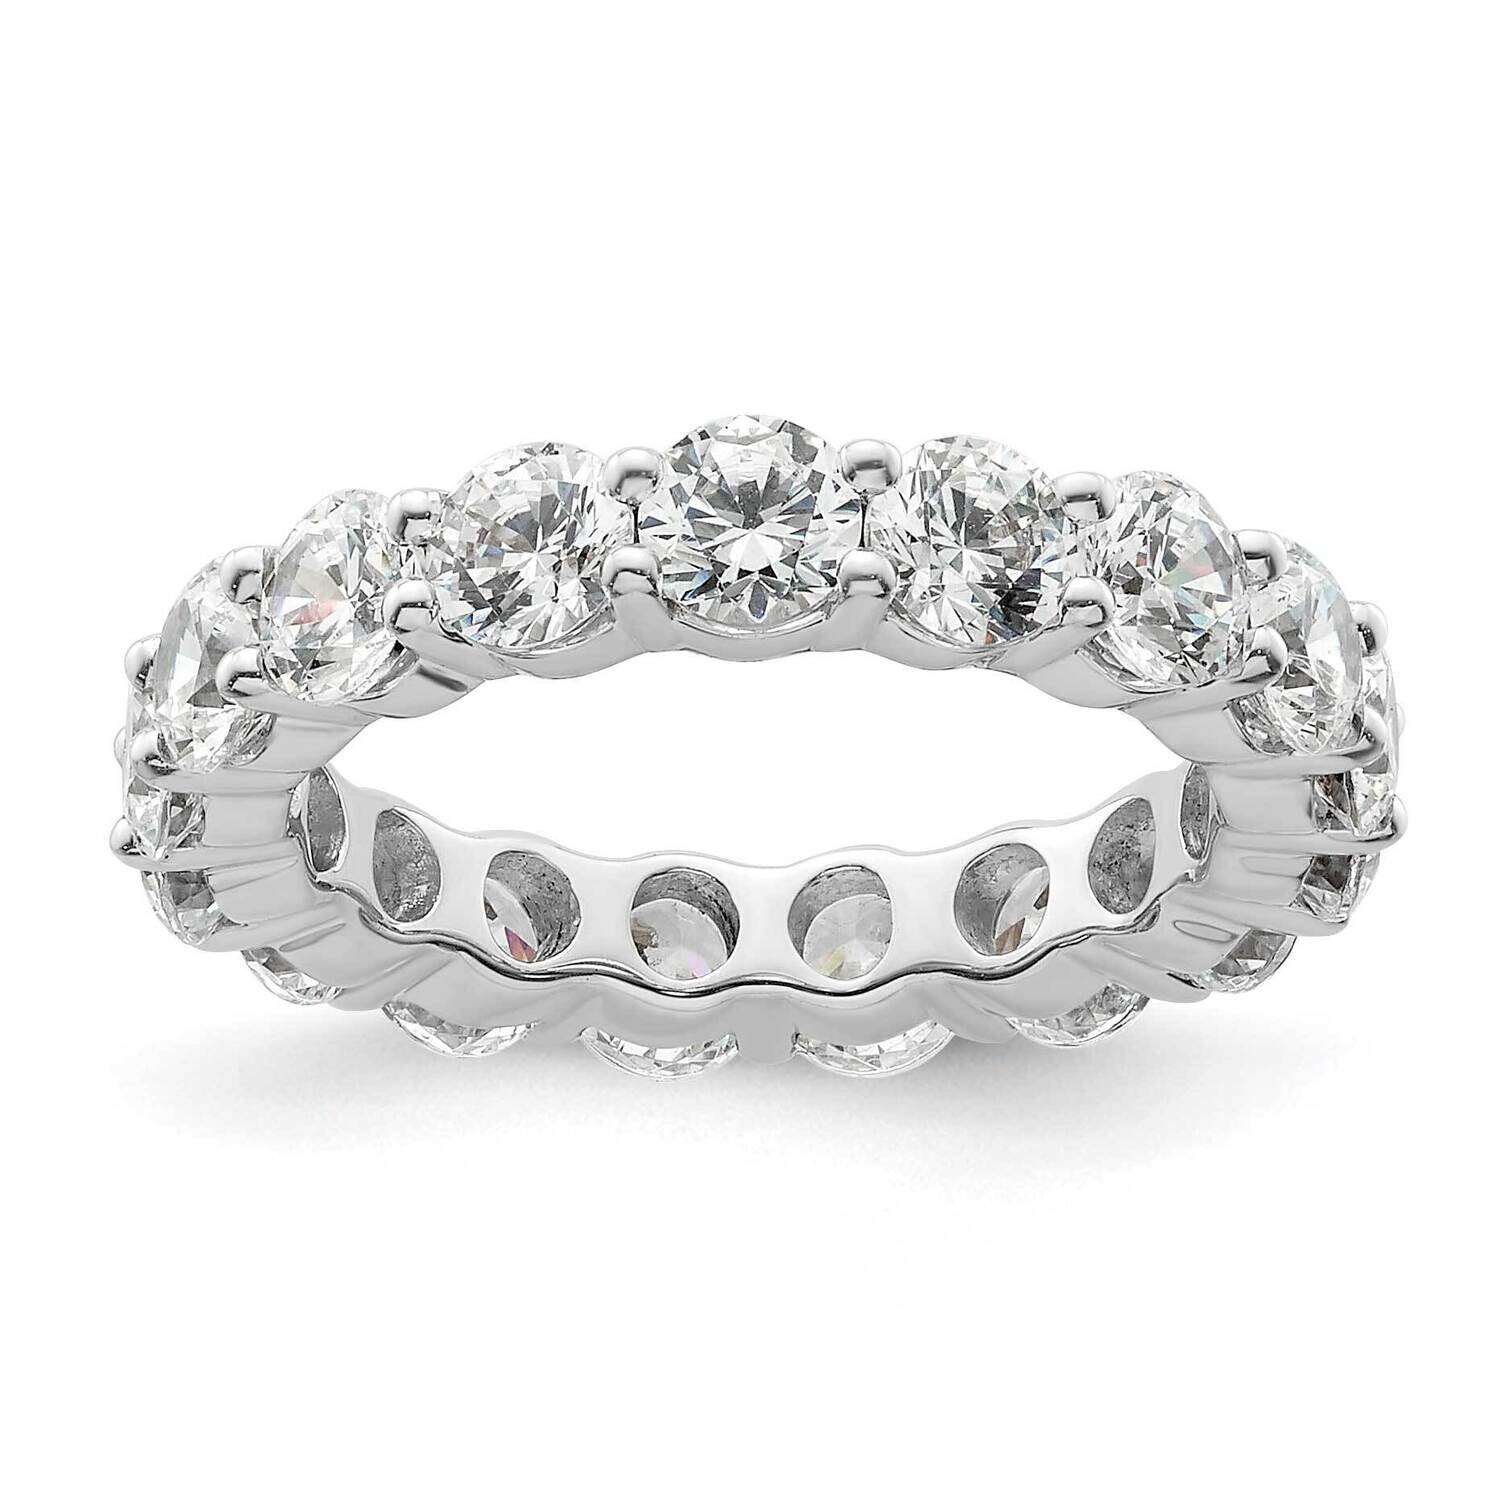 Polished Shared Prong 3 Carat Diamond Complete Eternity Band 14k White Gold ET0001-300-4W4